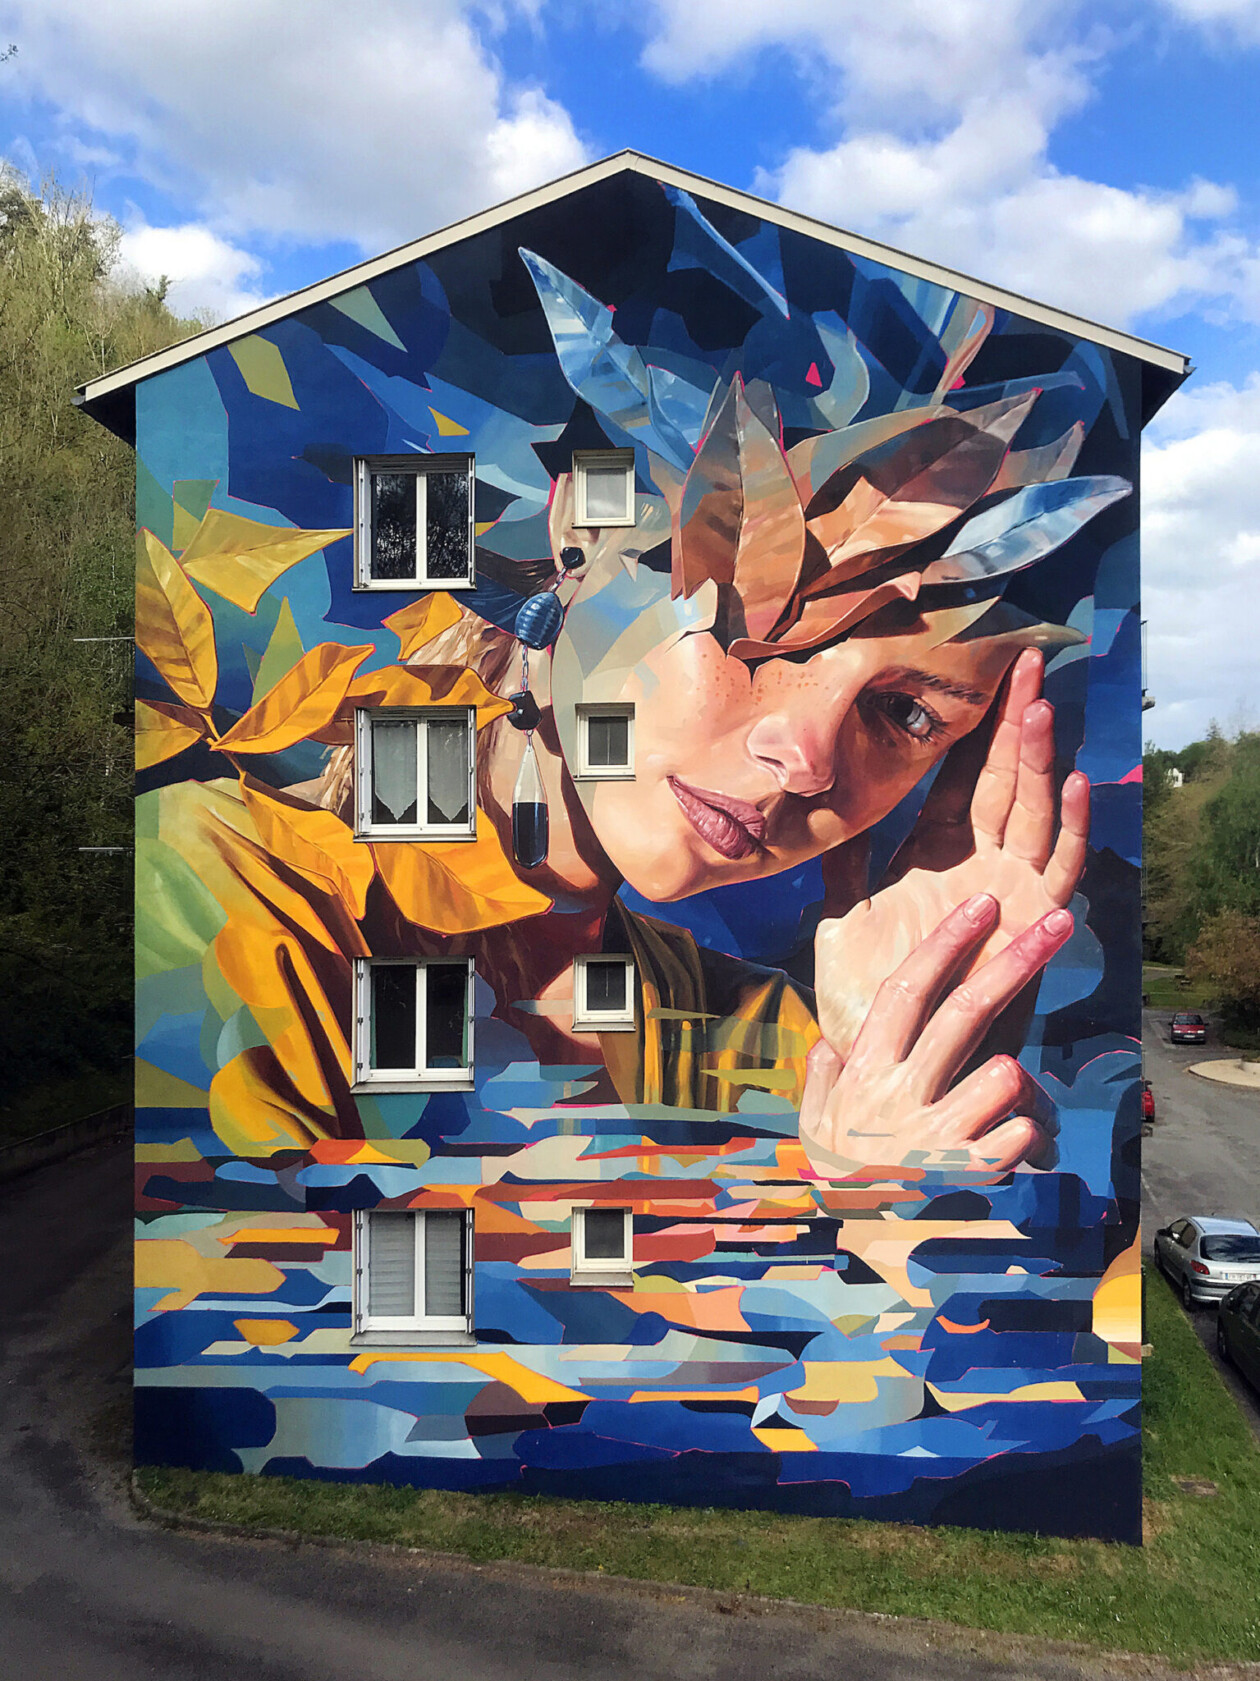 Stunningly Surreal Figurative Murals By Ratur (12)